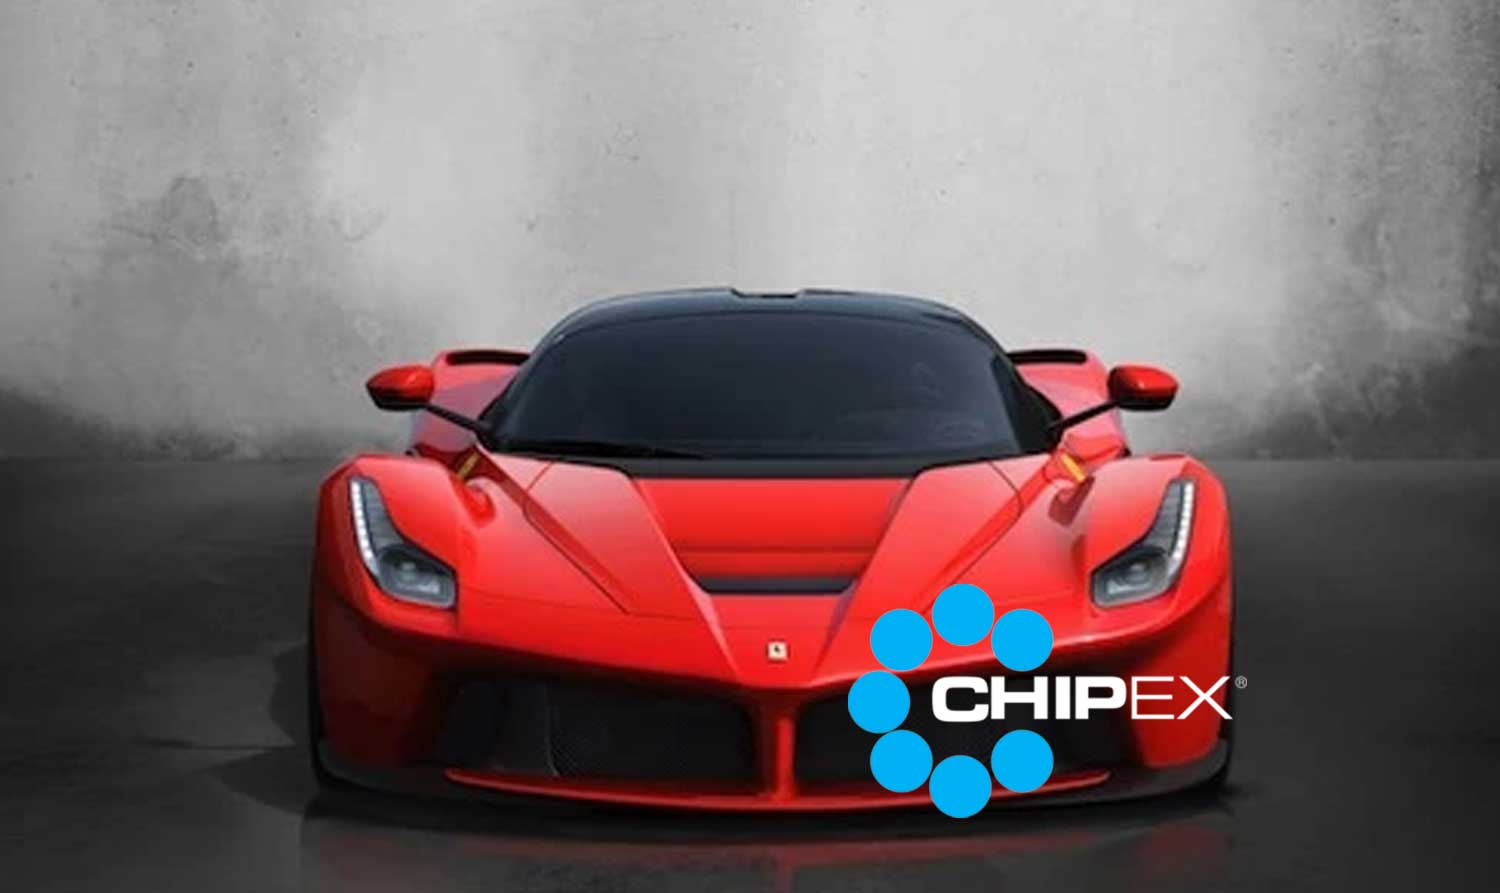 Perfect for Petrolheads: Videos featuring Ferrari supercars Image